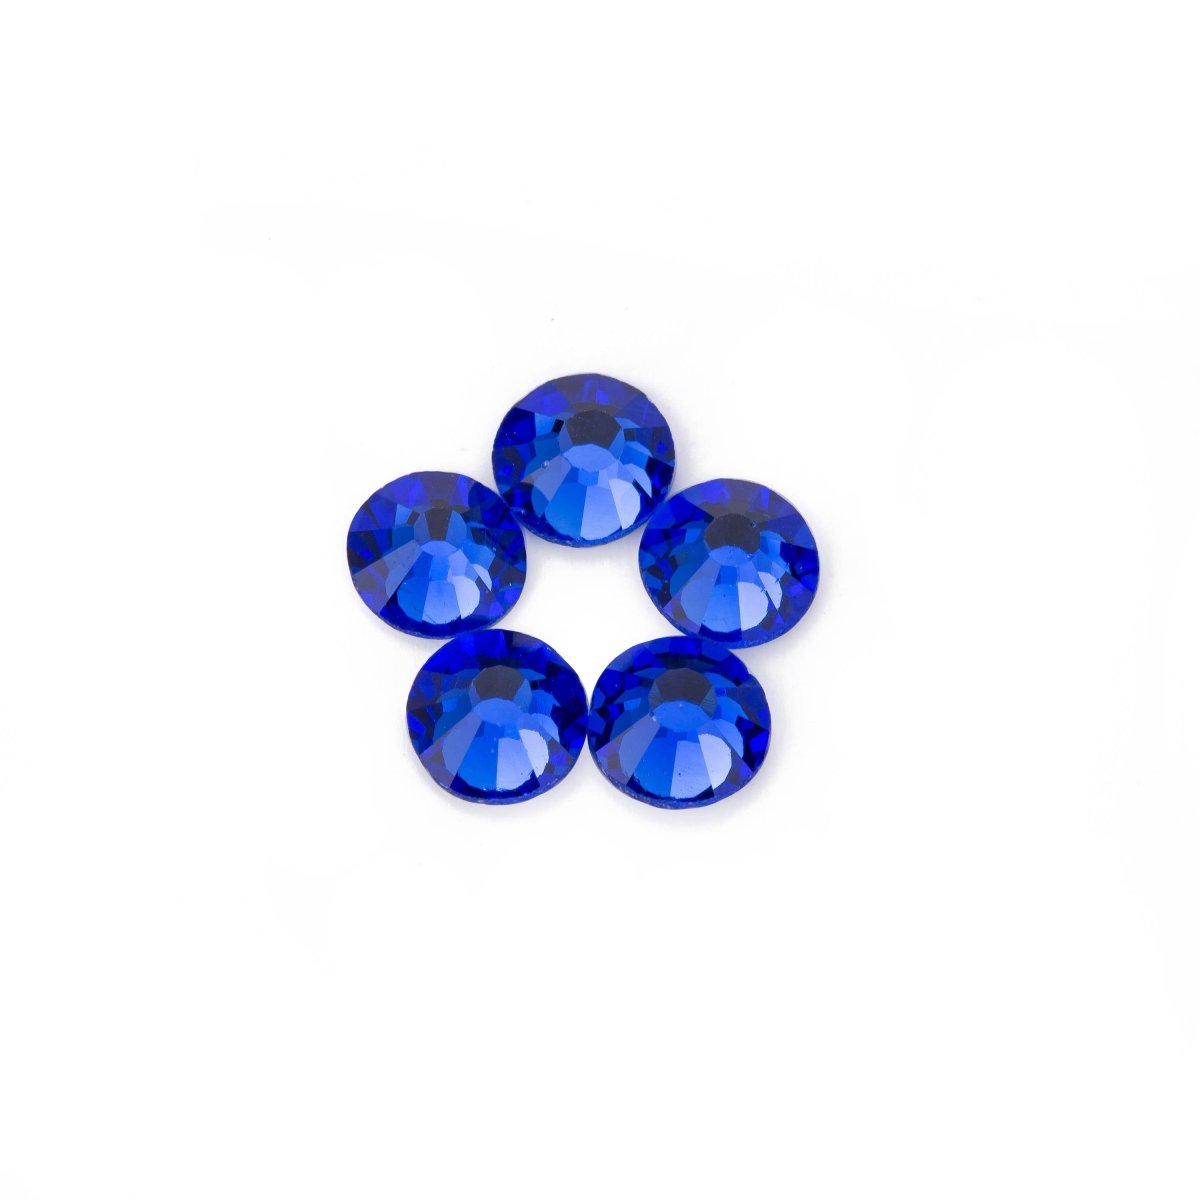 High Quality Crystal Bright Sapphire Blue Rhinestones loose flat back No Hot Fix bead Size ss 10/ ss 12/ ss14 / ss16 / ss20 / ss30 / ss34 - DLUXCA